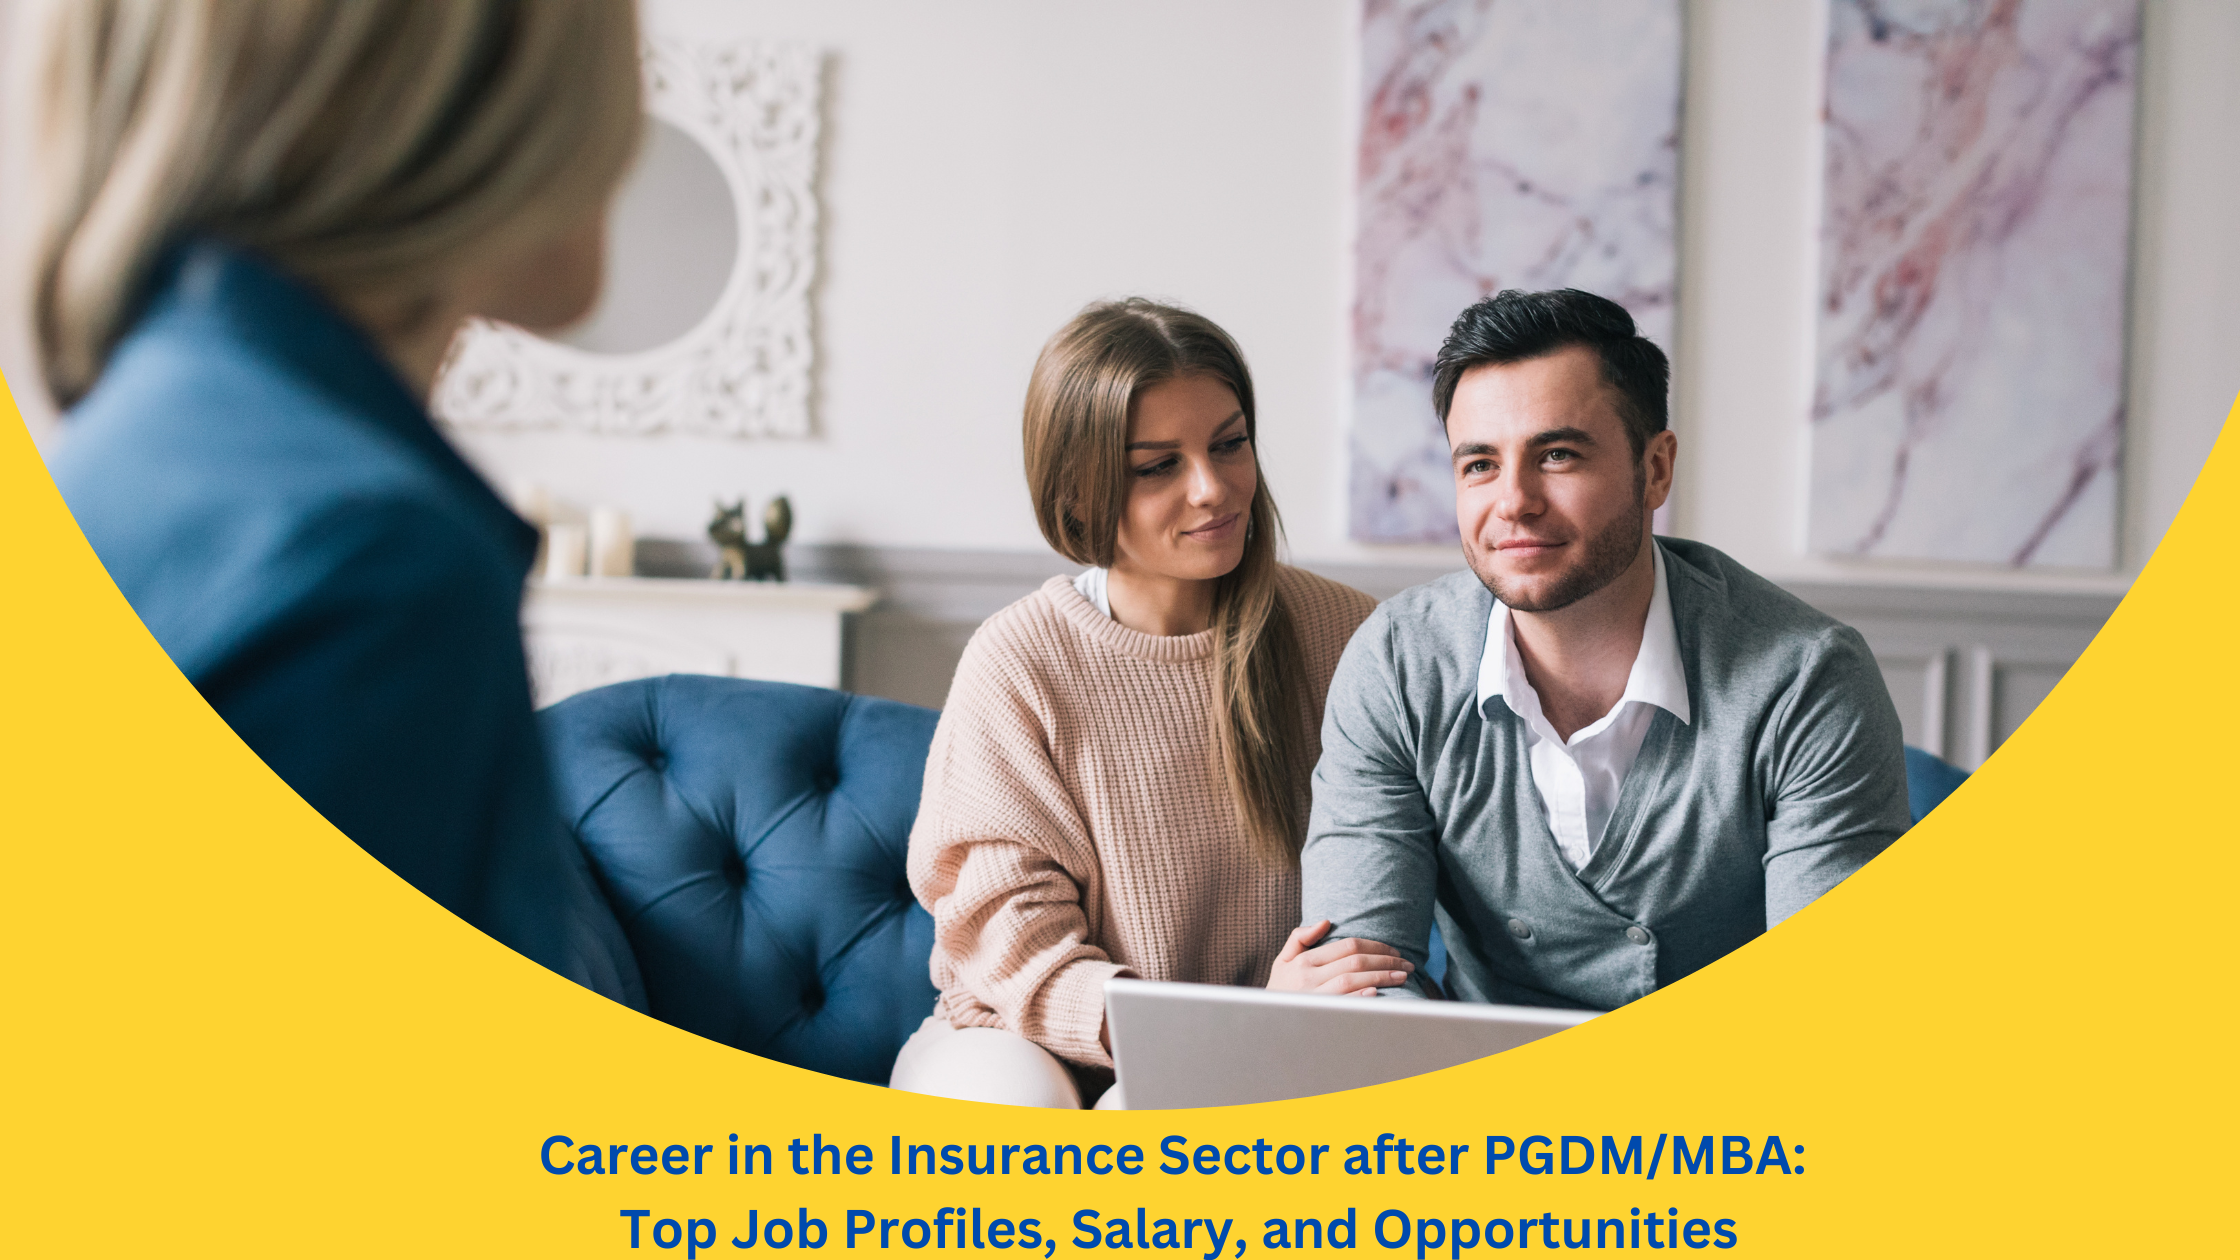 Career in the Insurance Sector after PGDM/MBA: Top Job Profiles, Salary, and Opportunities